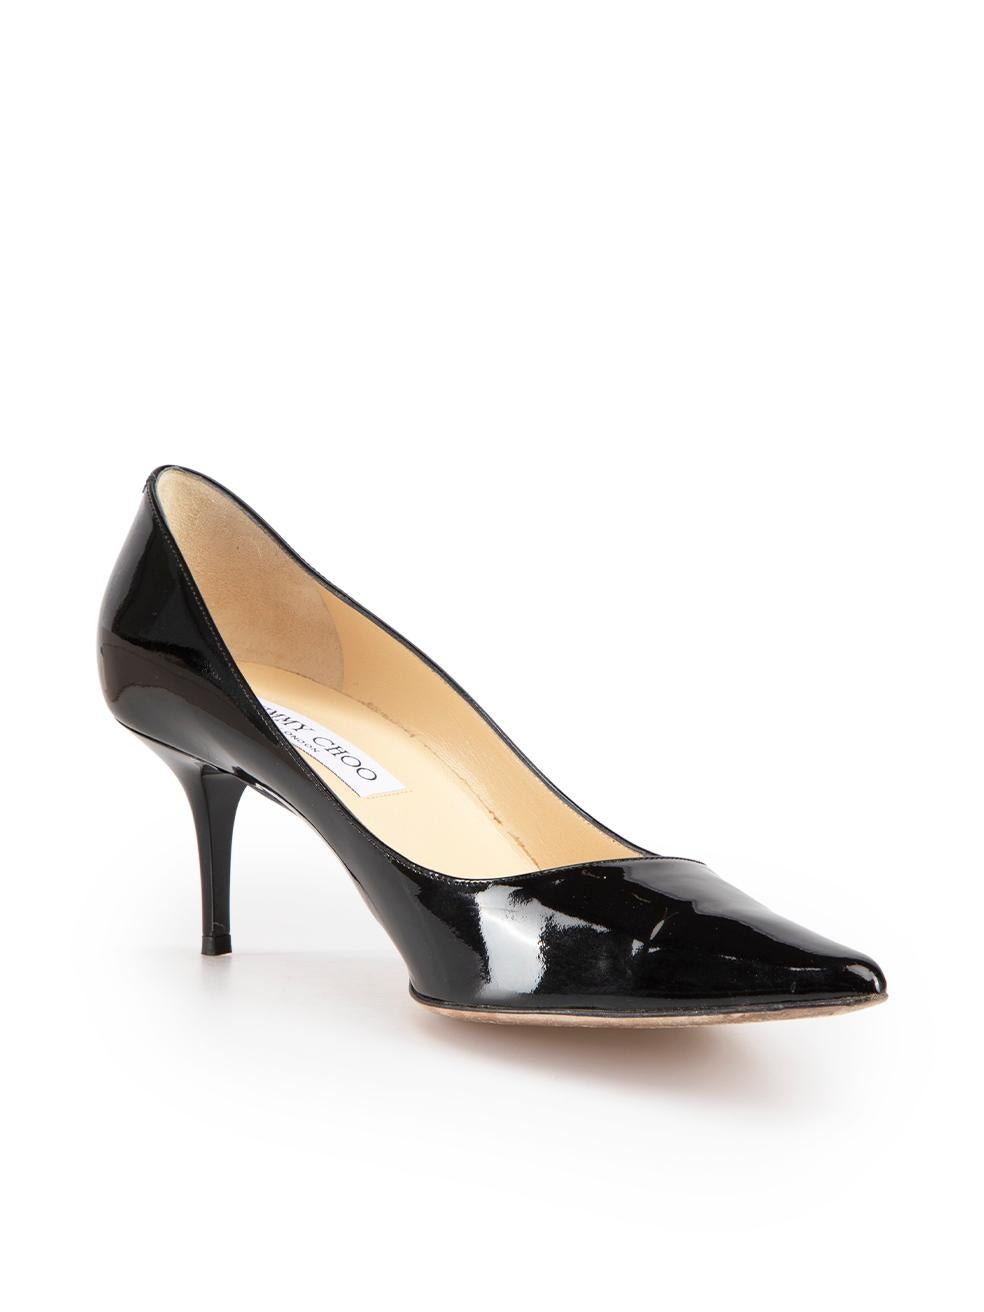 CONDITION is Very good. Minimal wear to shoes is evident. Minimal wear to the leather with general creasing on this used Jimmy Choo designer resale item. These shoes come with original box.
 
Details
Atilla
Black
Patent leather
Pumps
Kitten